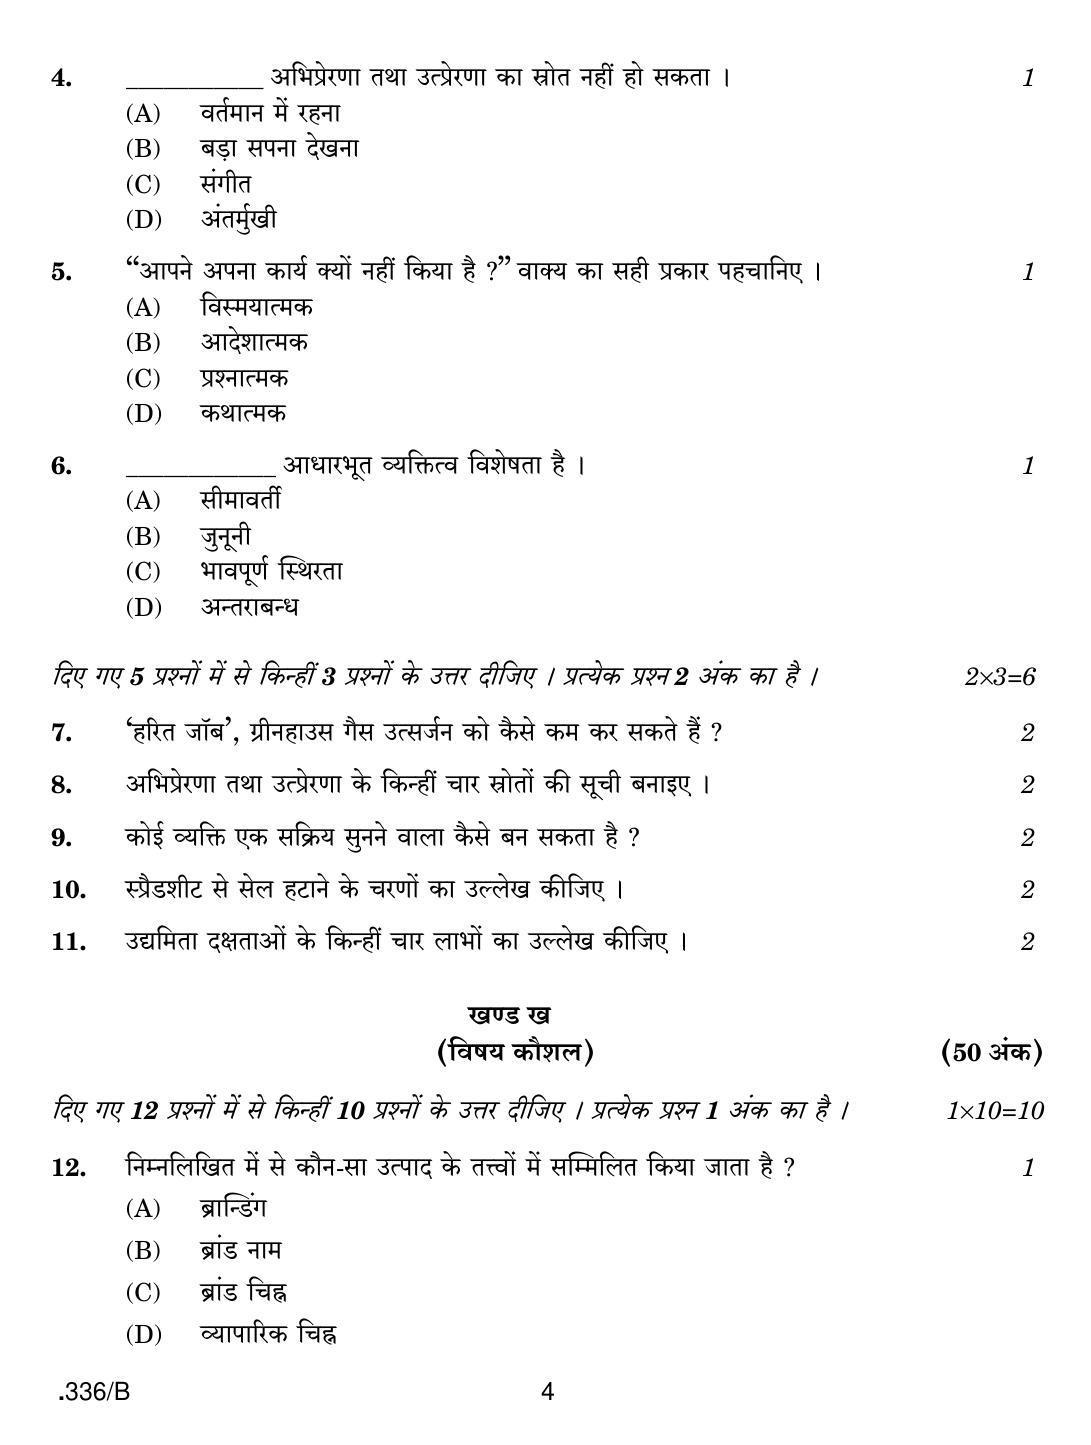 CBSE Class 12 Marketing 2020 Compartment Question Paper - Page 4